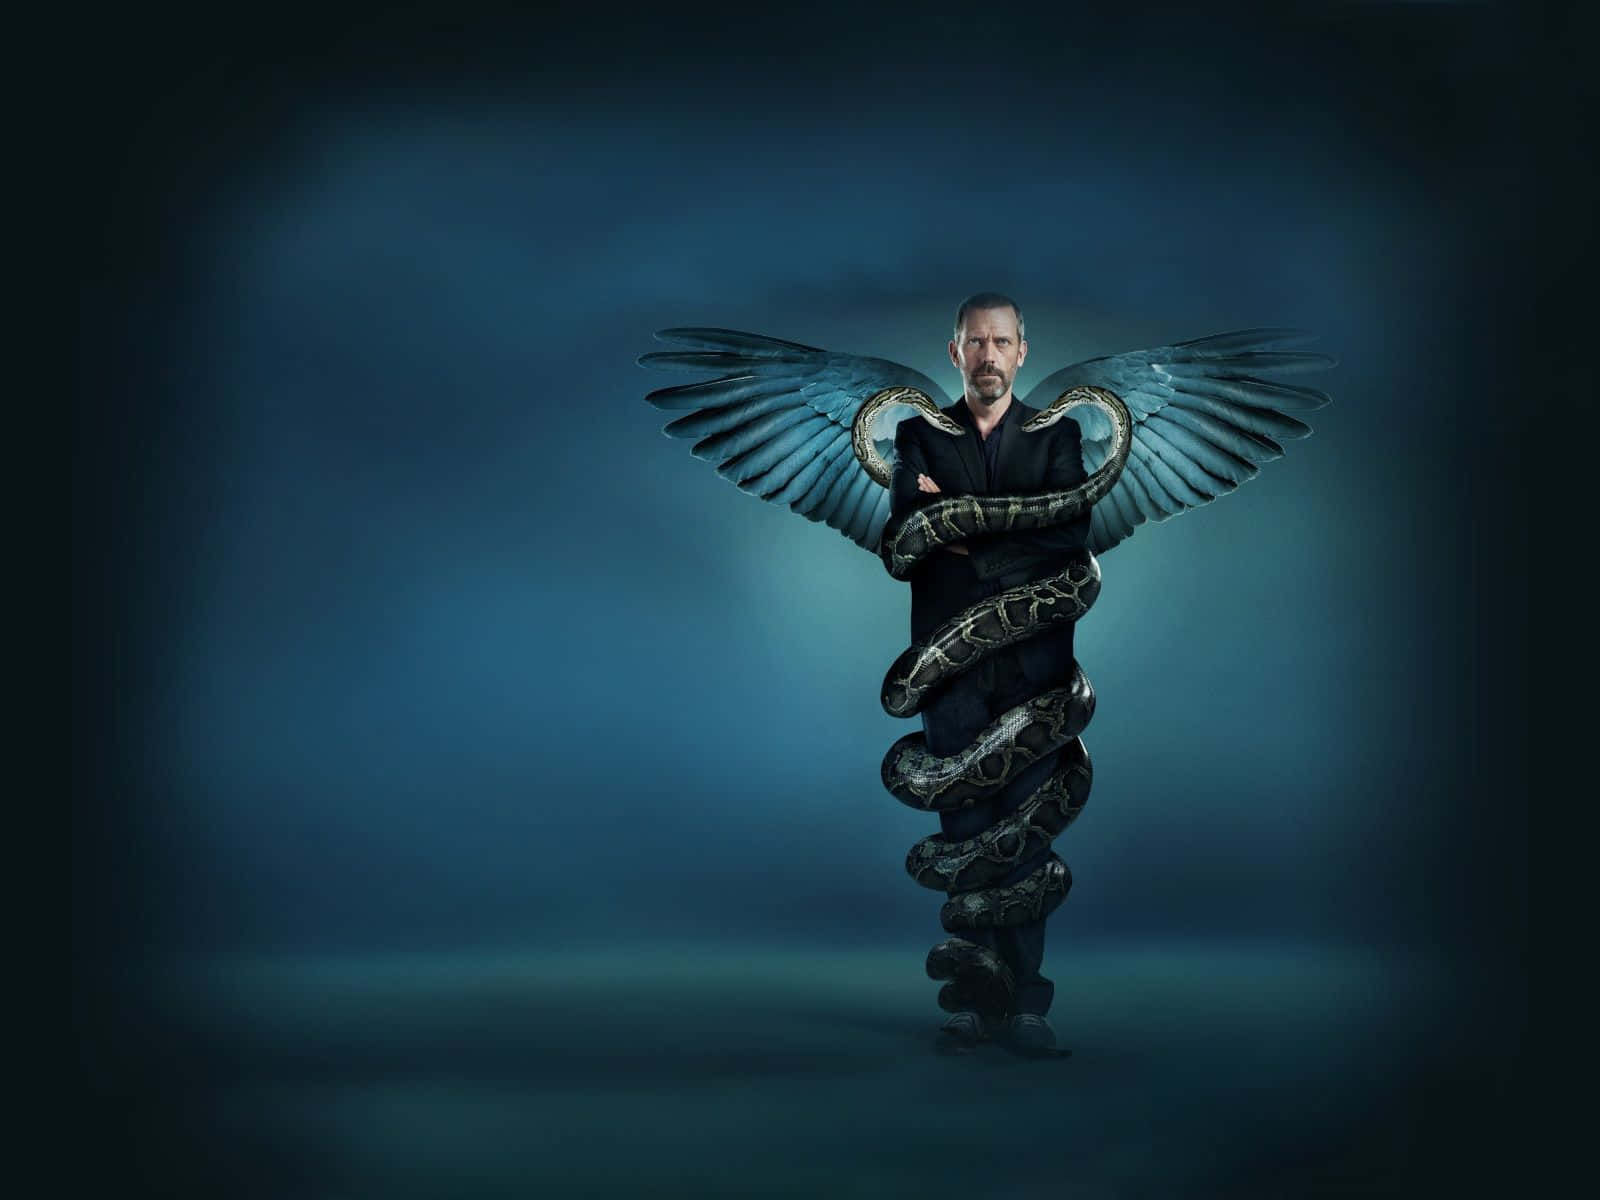 Hd Medical Staff With Wings And Snake